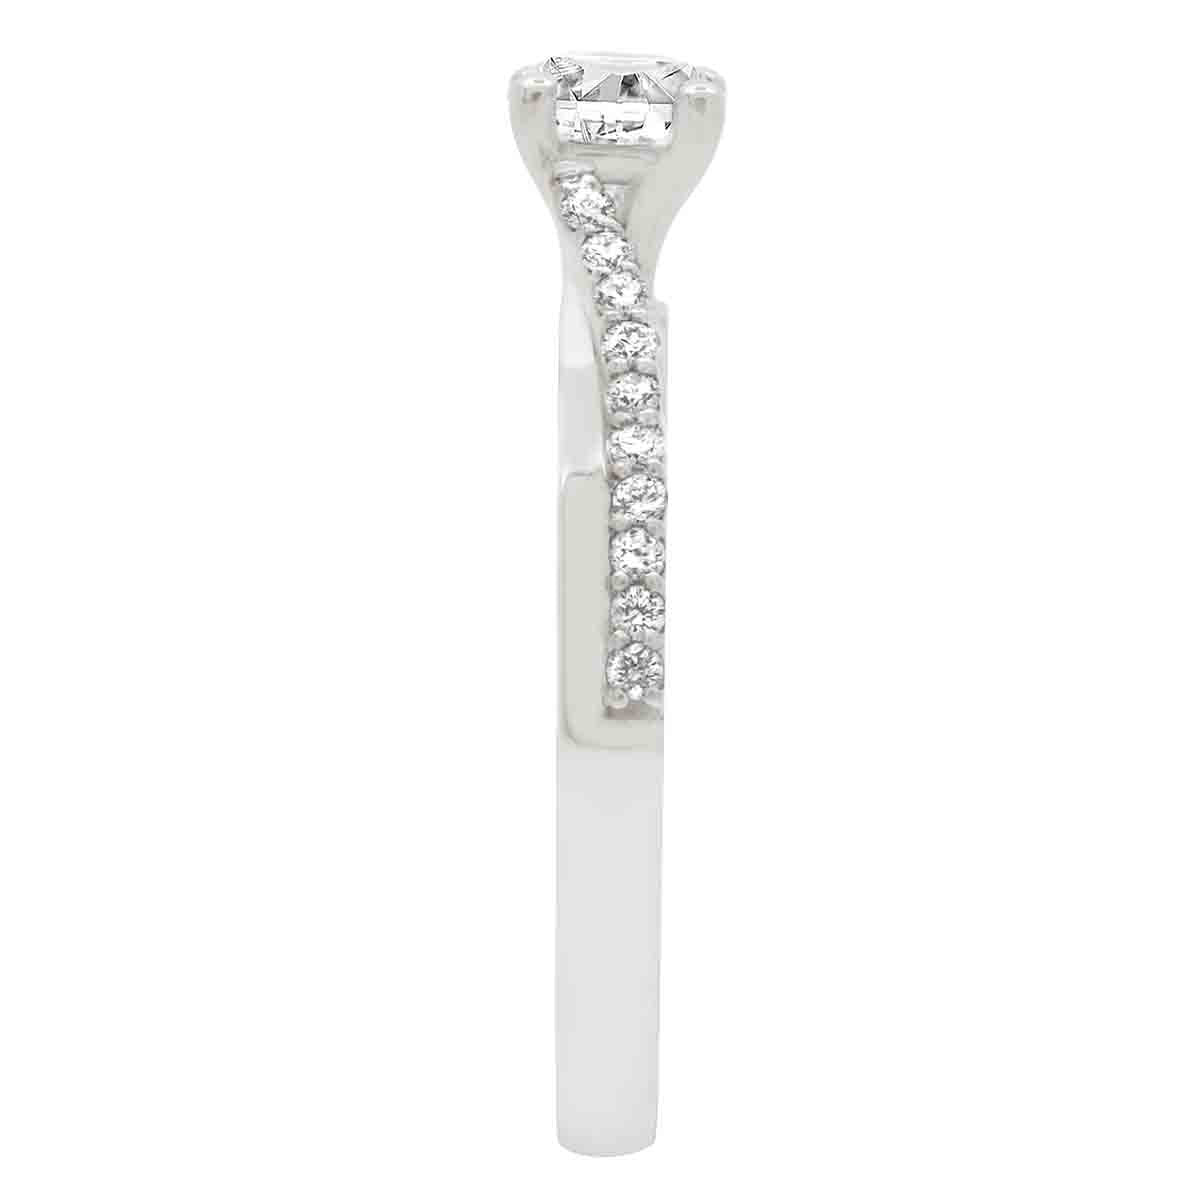 Debeers Promise Ring Style in white gold upright and viewed from the side